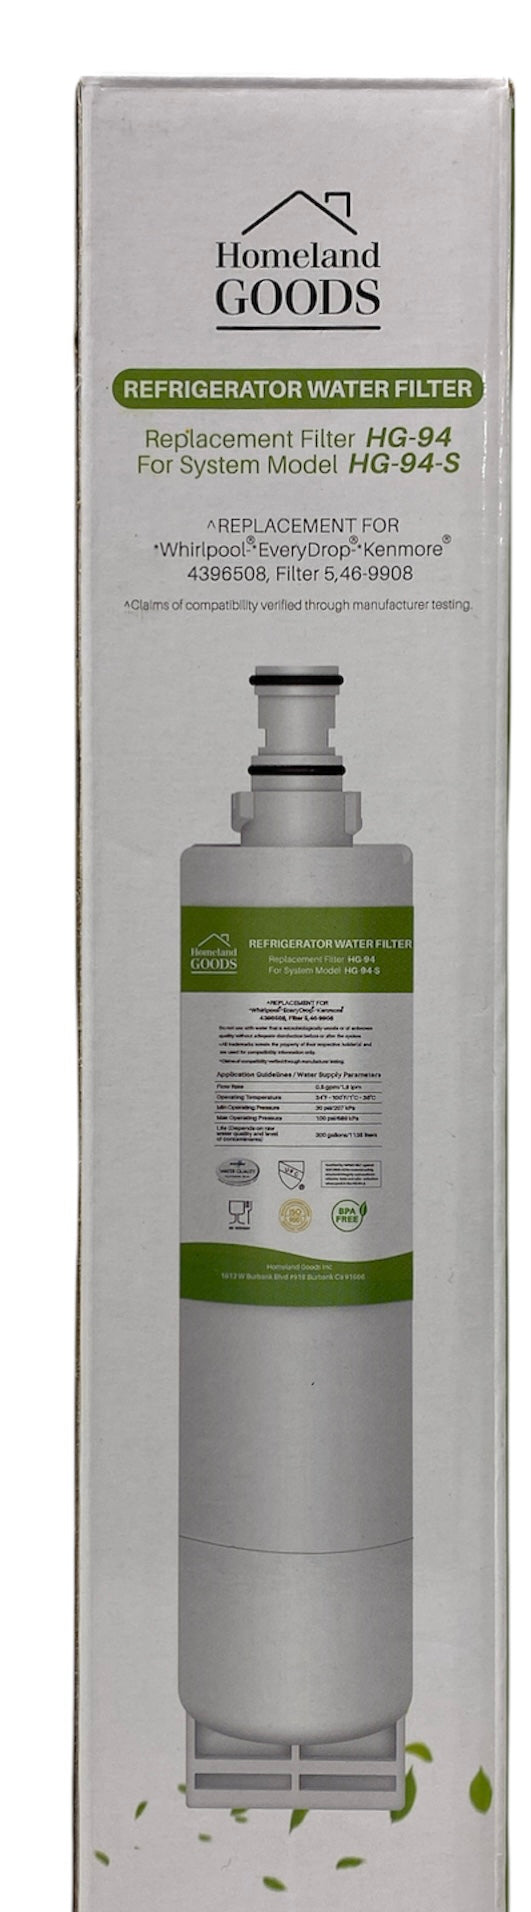 RWF0500A Refrigerator Water Filter IAPMO Certified Replacement for EDR5RXD1,4396510,4392857,EveryDrop Filter 5,PUR W10186668,Kenmore 46-9010, NLC240V,RWF0500A Refrigerator Water Filter Replacement